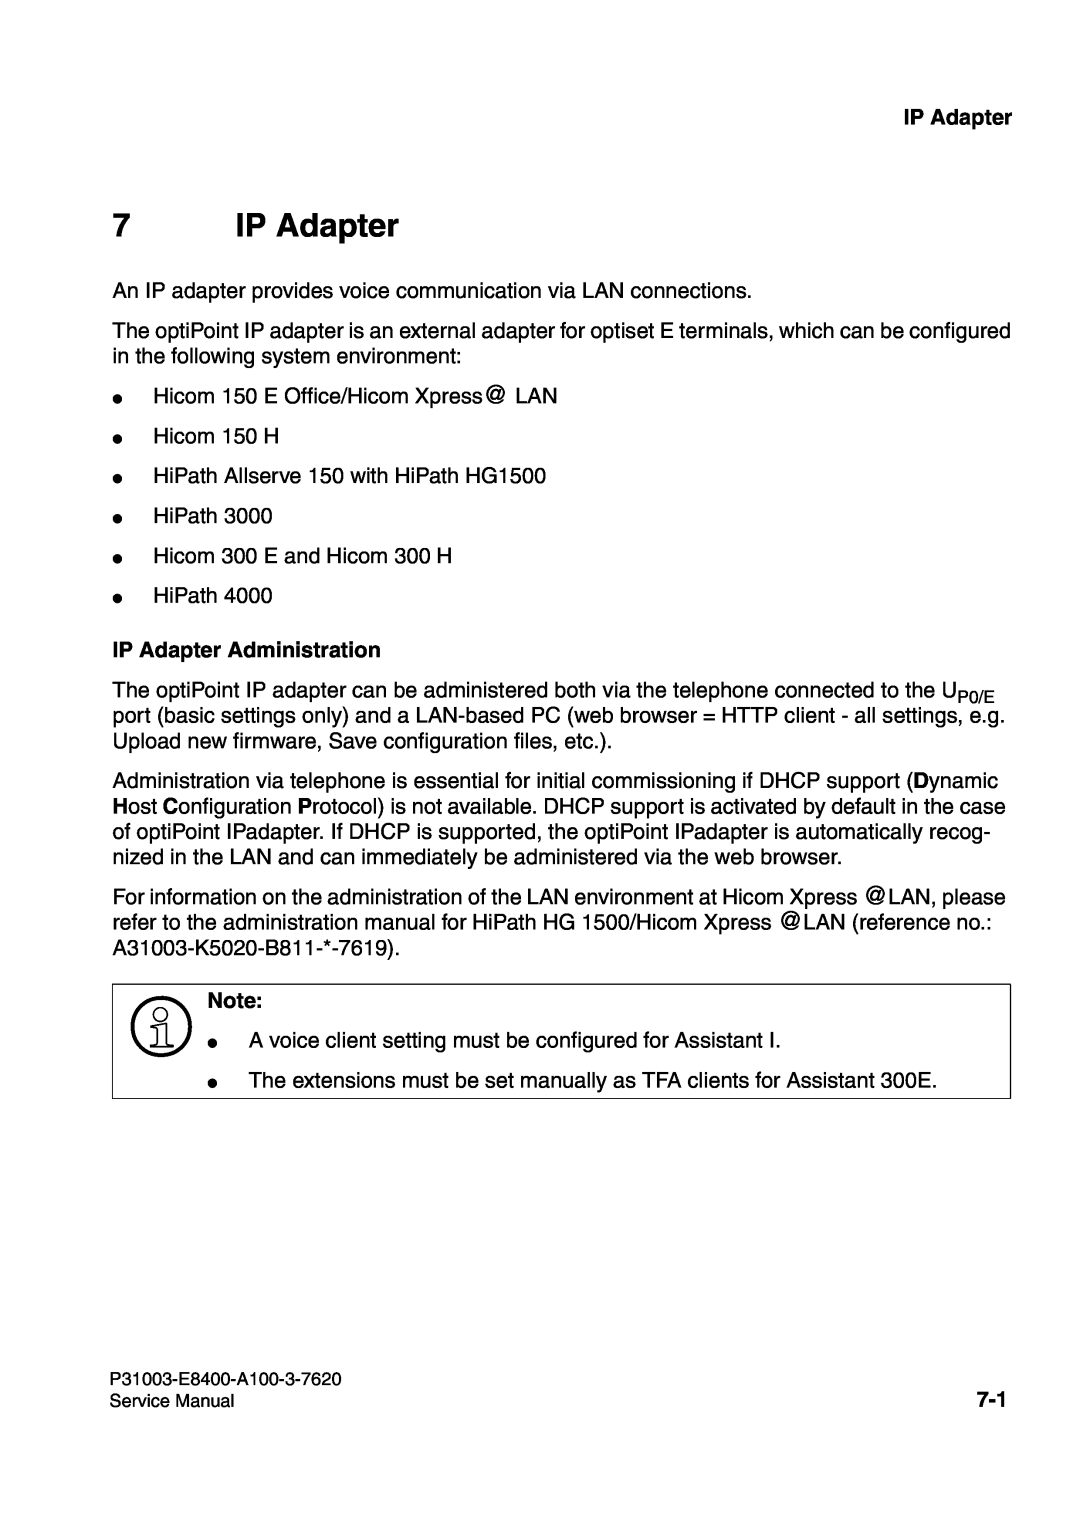 Siemens 500 service manual IP Adapter Administration 